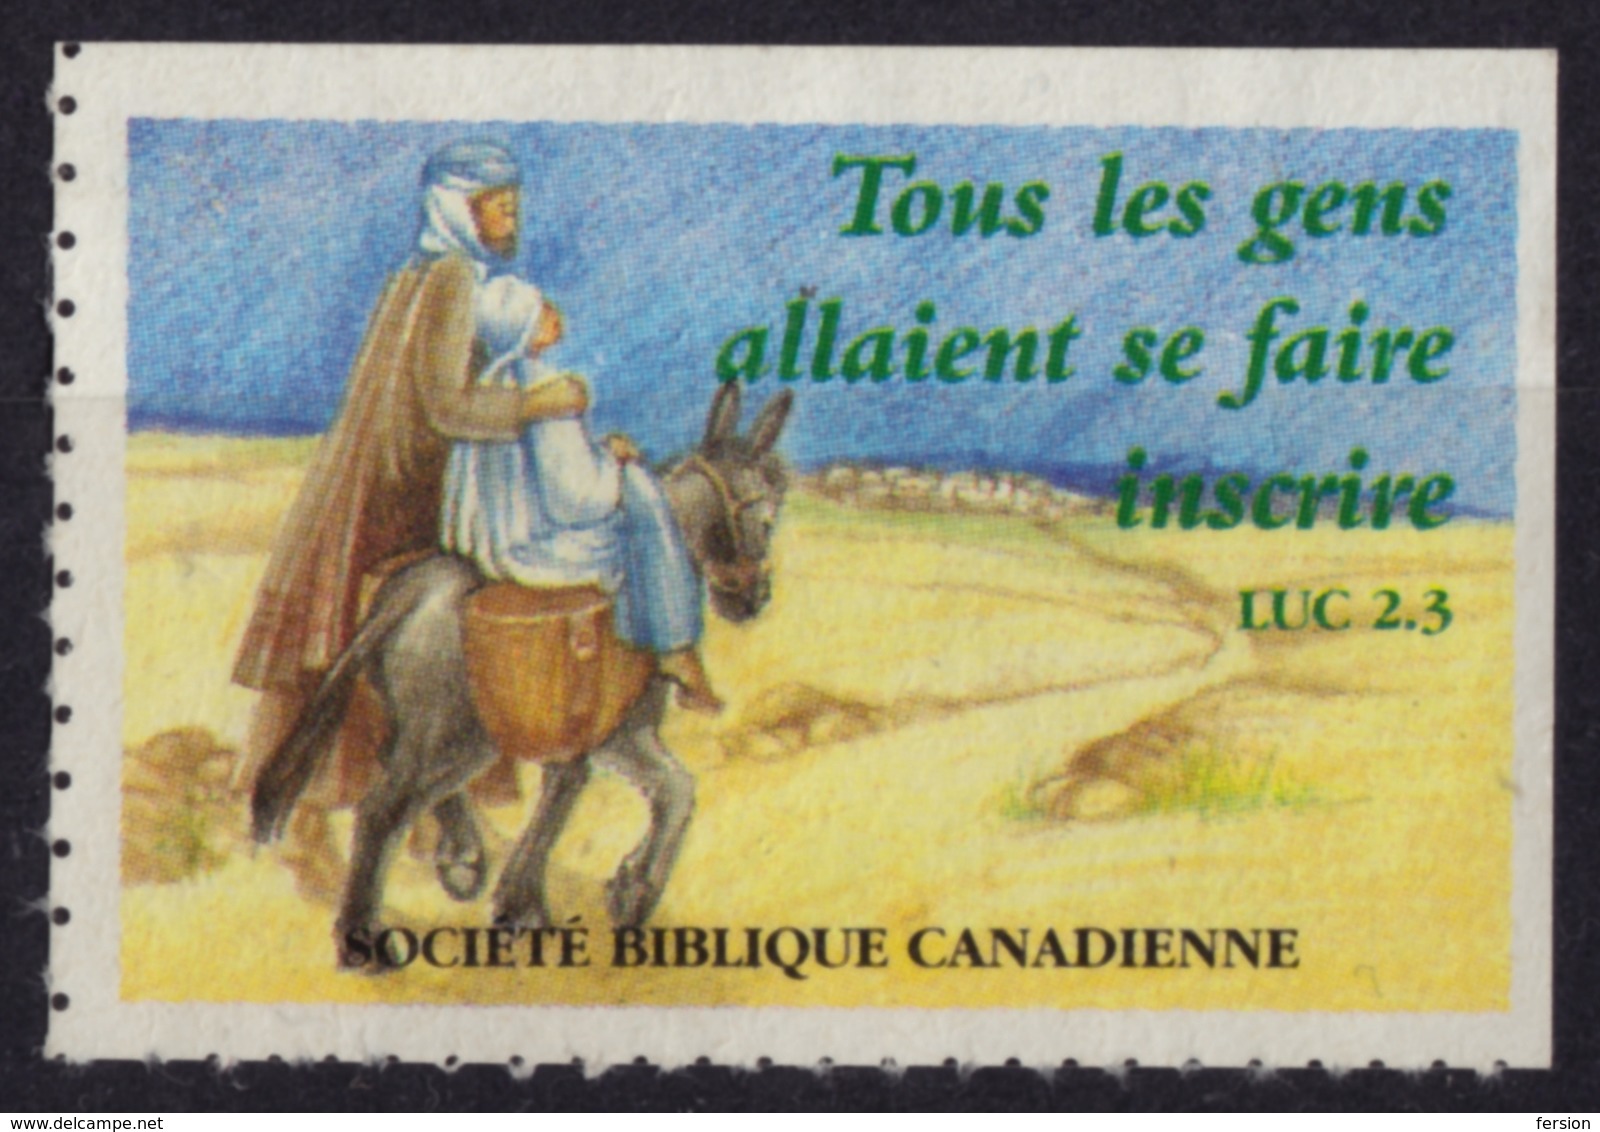 CANADA Bible Society / Christianity - Charity Stamp / Label / Cinderella / Vignette  - Used - Mary Joseph Donkey - Burros Y Asnos